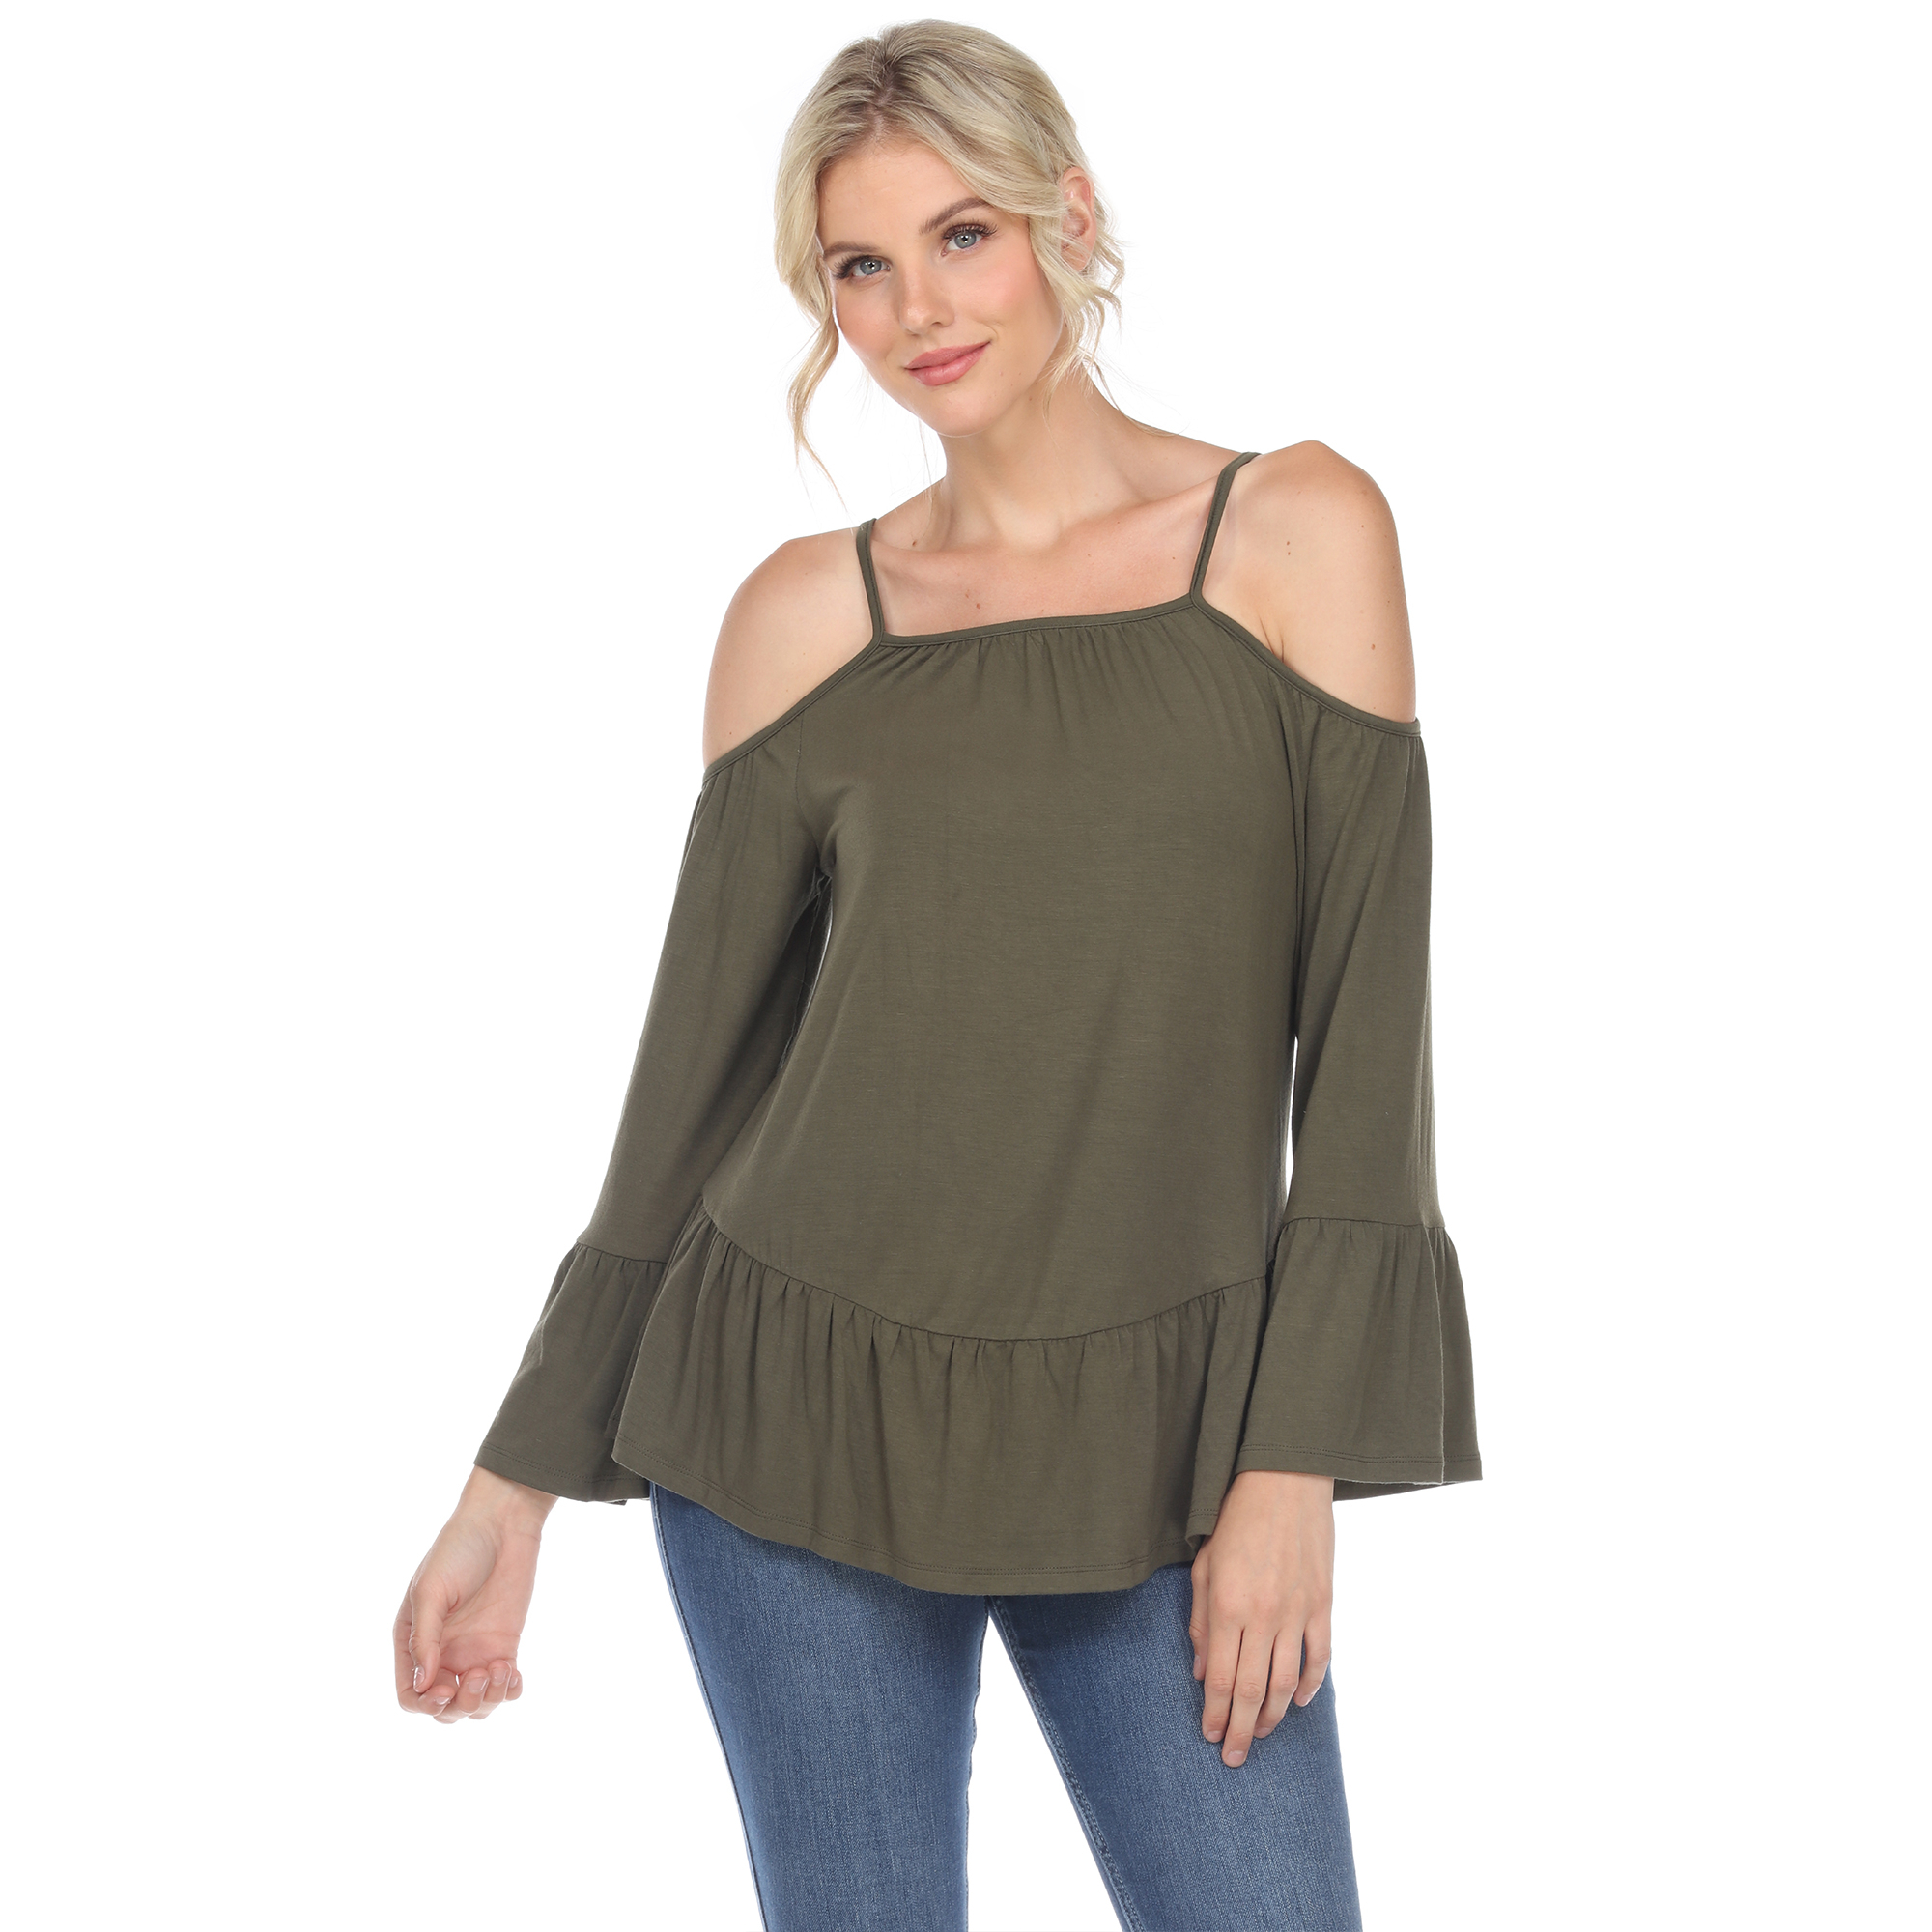 White Mark Women's Cold Shoulder Ruffle Sleeve Top - Olive, 3X